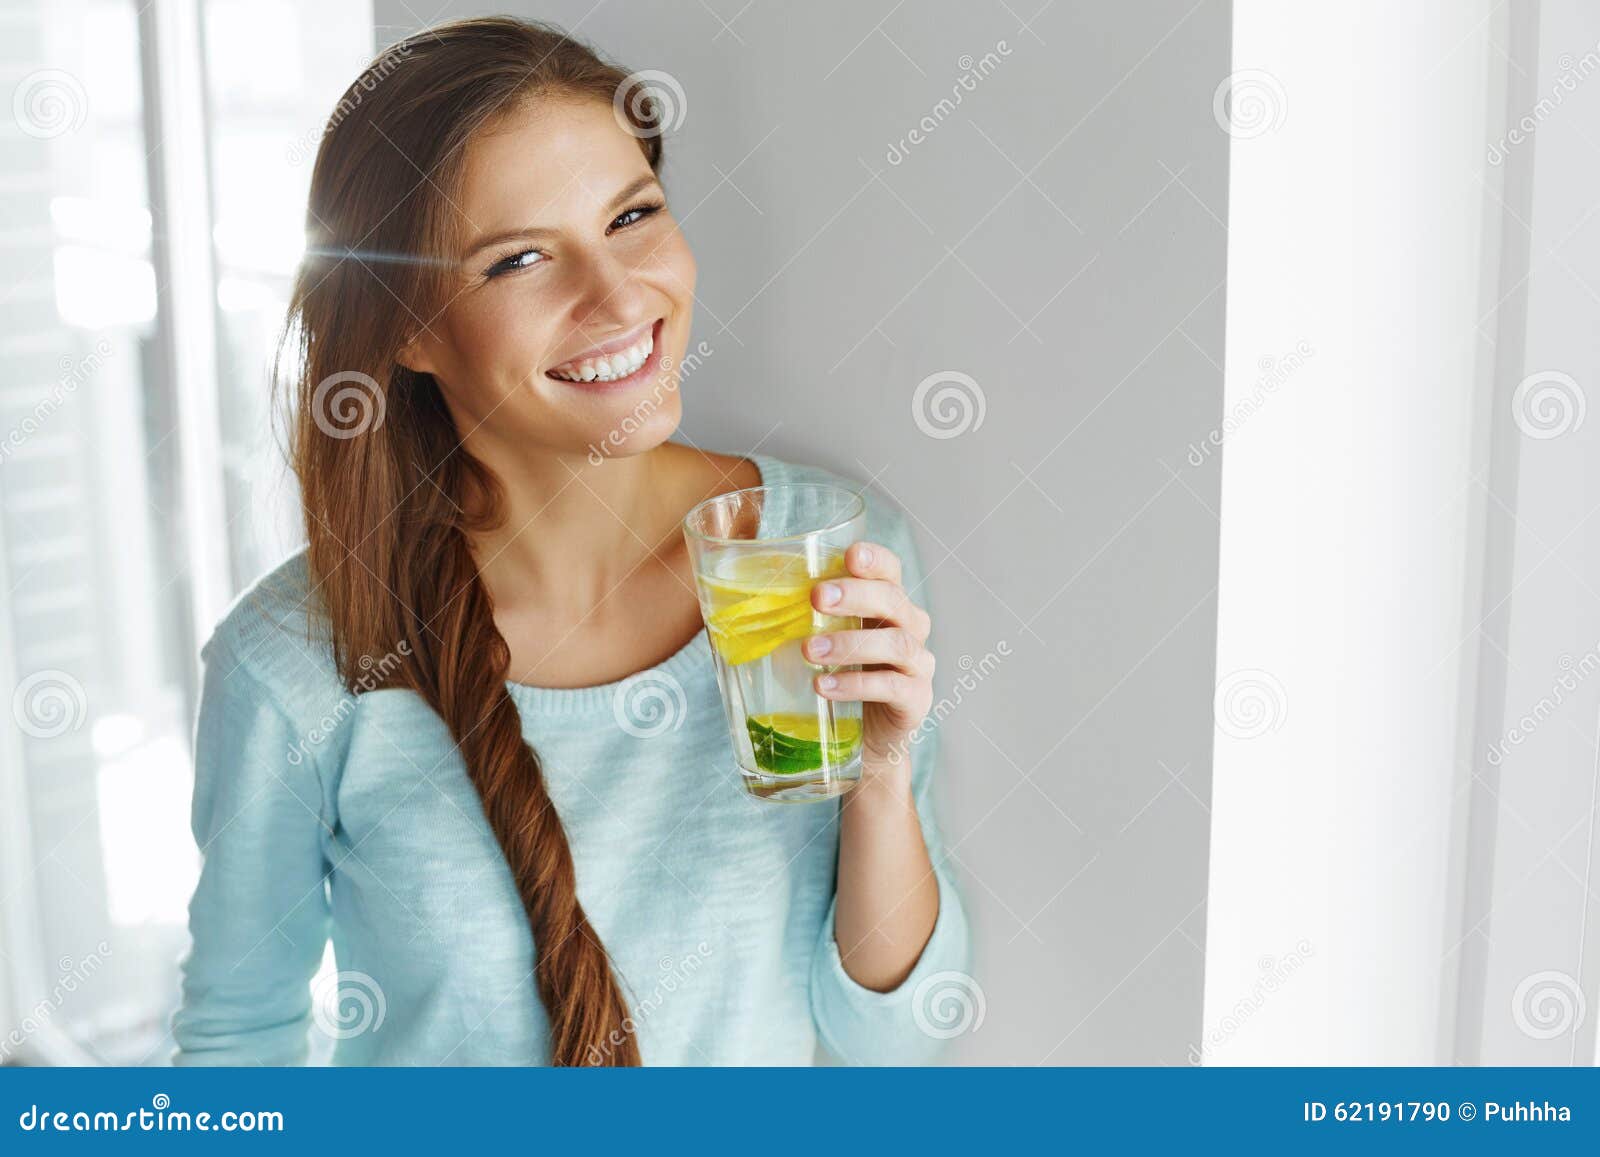 healthy lifestyle and food. woman drinking fruit water. detox. h